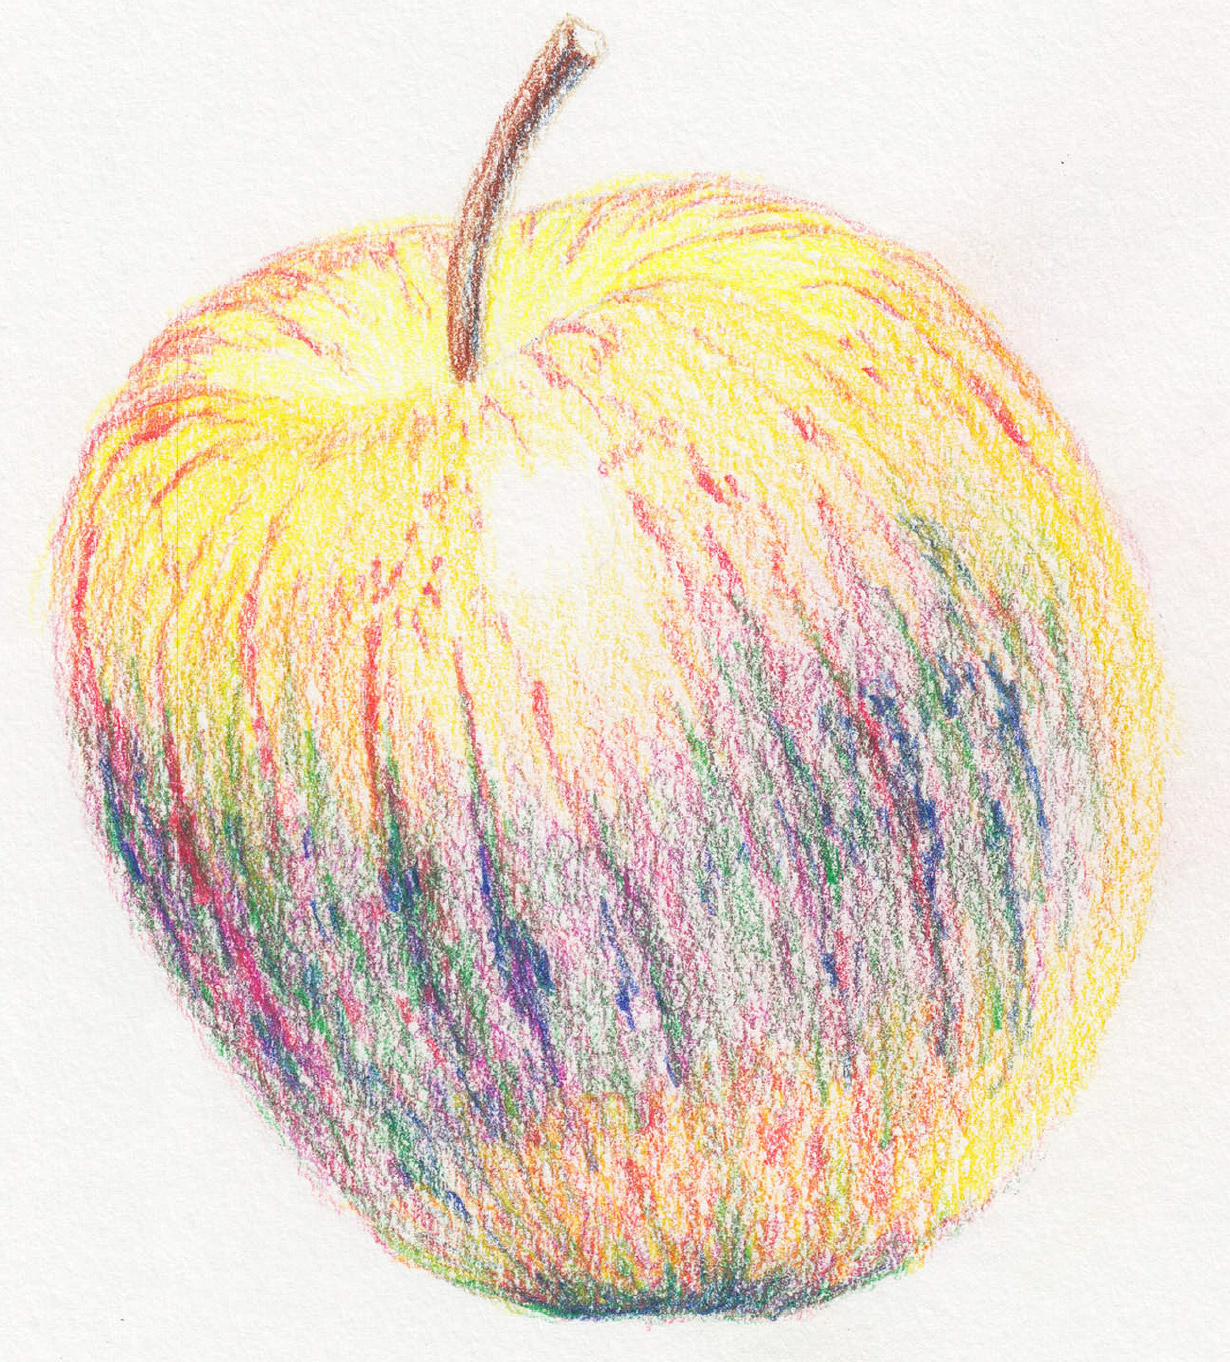 Drawing a realistic apple